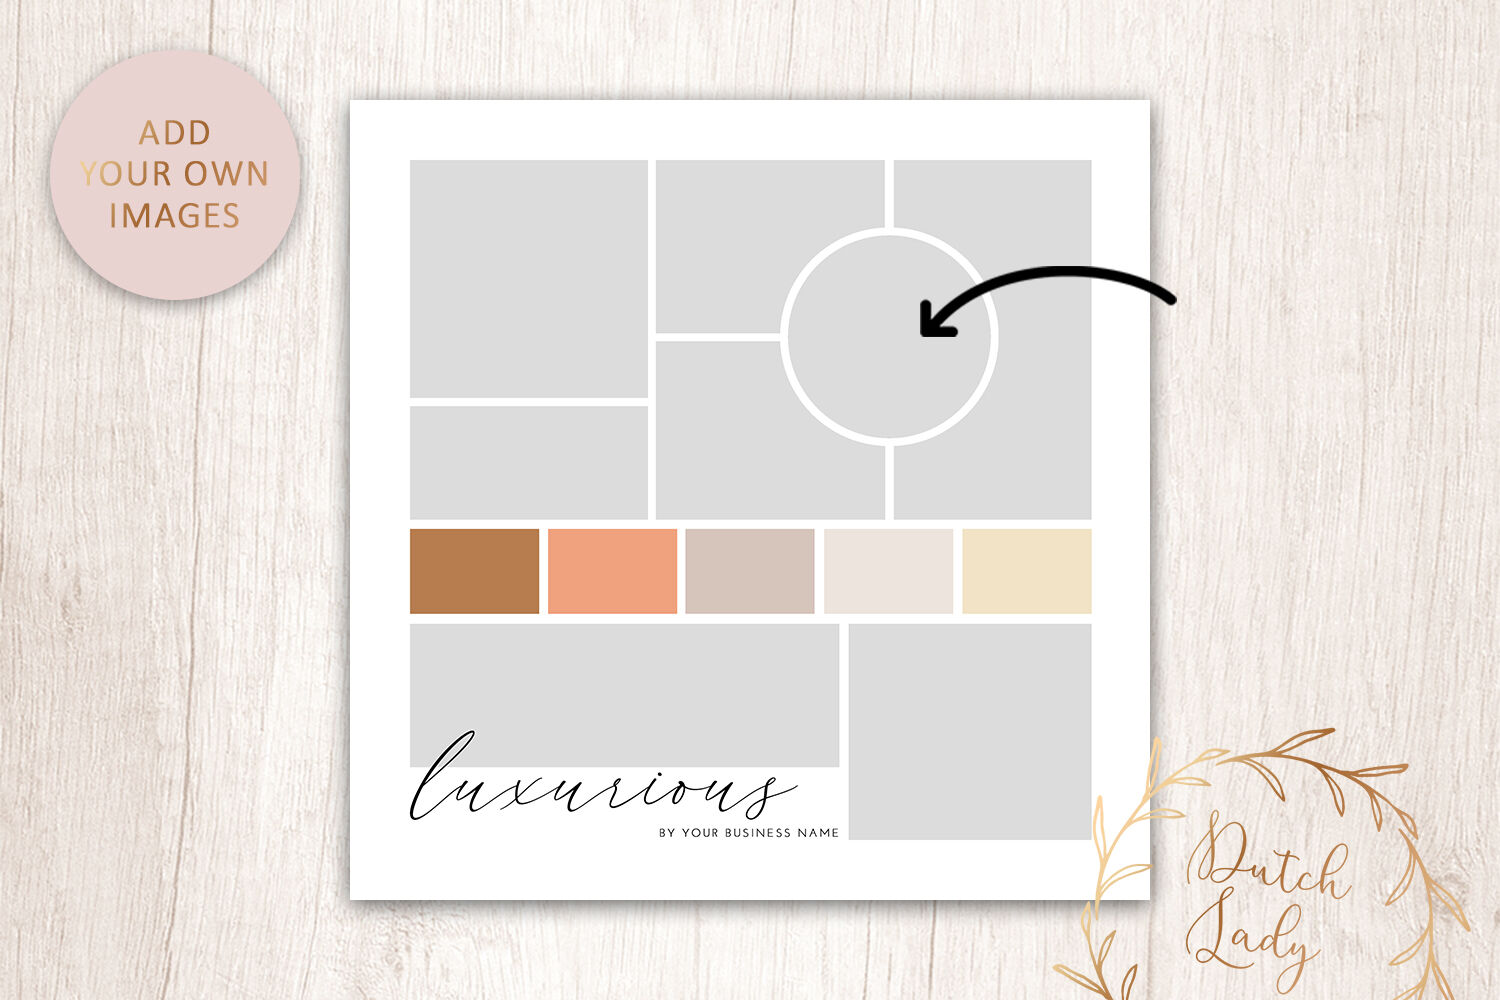 PSD Mood & Vision Board Template #7 By The Dutch Lady Designs ...